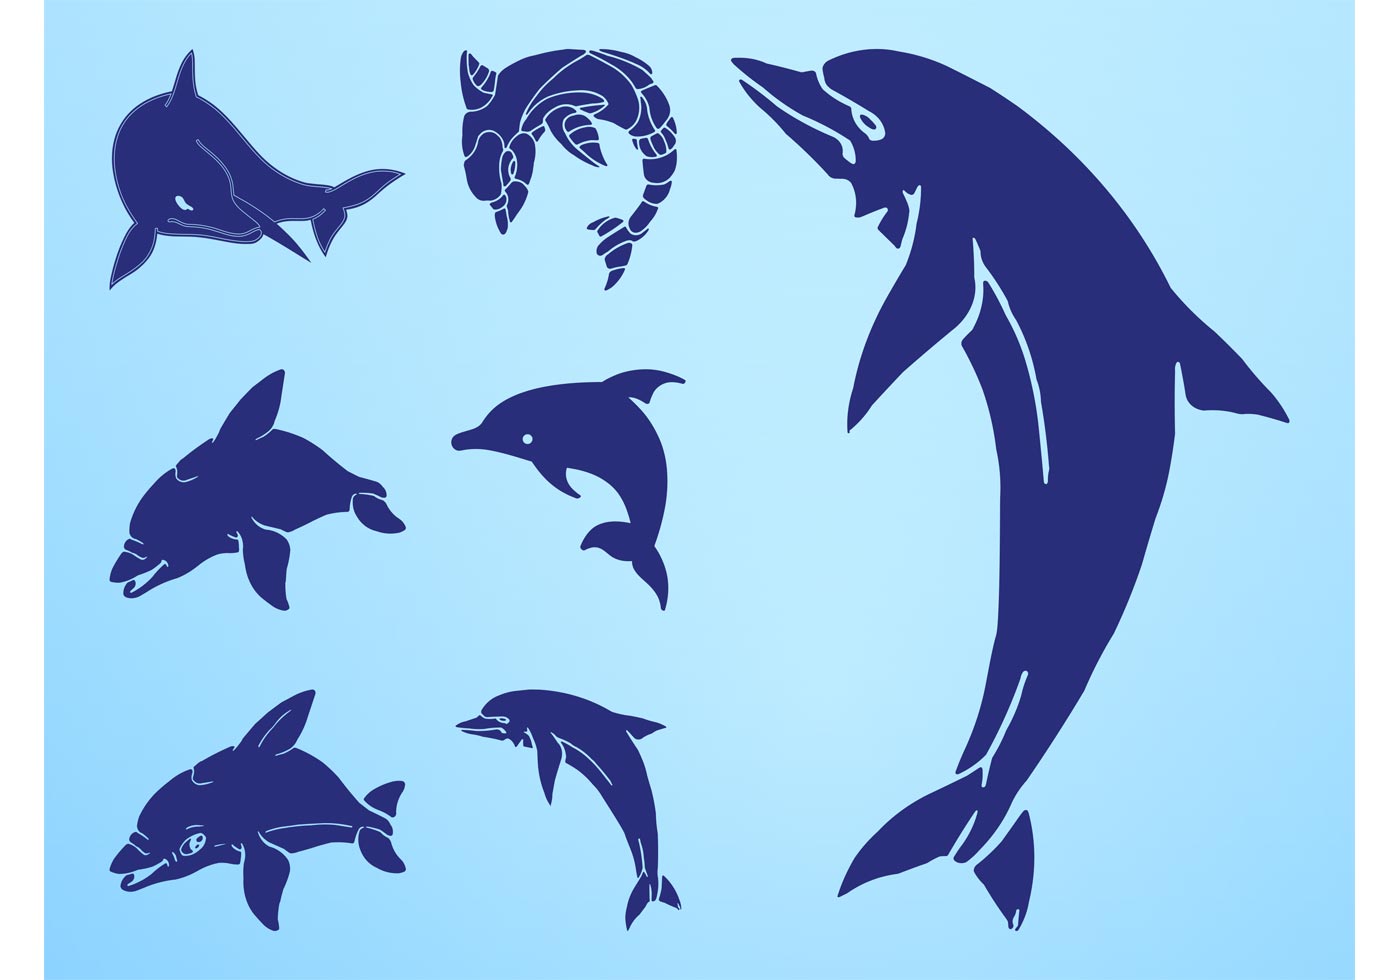 Dolphin Silhouettes Set - Download Free Vector Art, Stock Graphics & Images